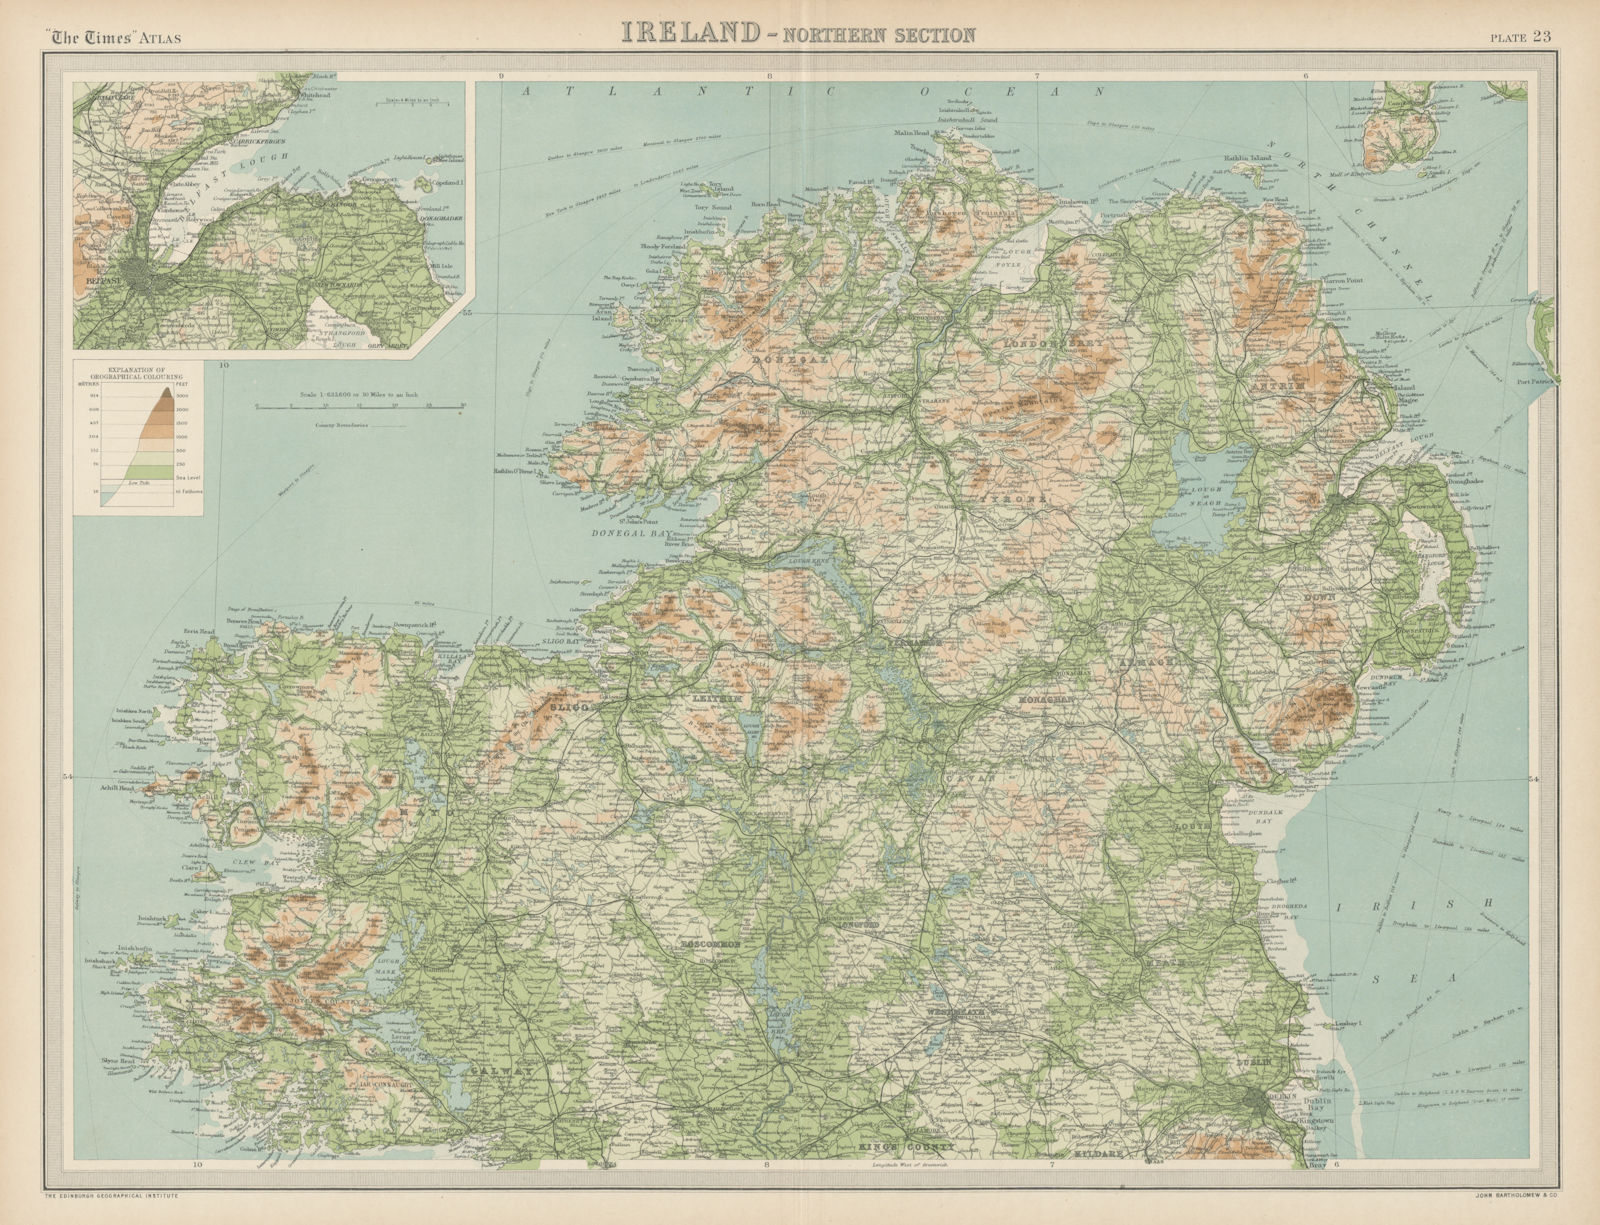 Associate Product Ireland - northern section. Ulster. Relief & railways. THE TIMES 1922 old map